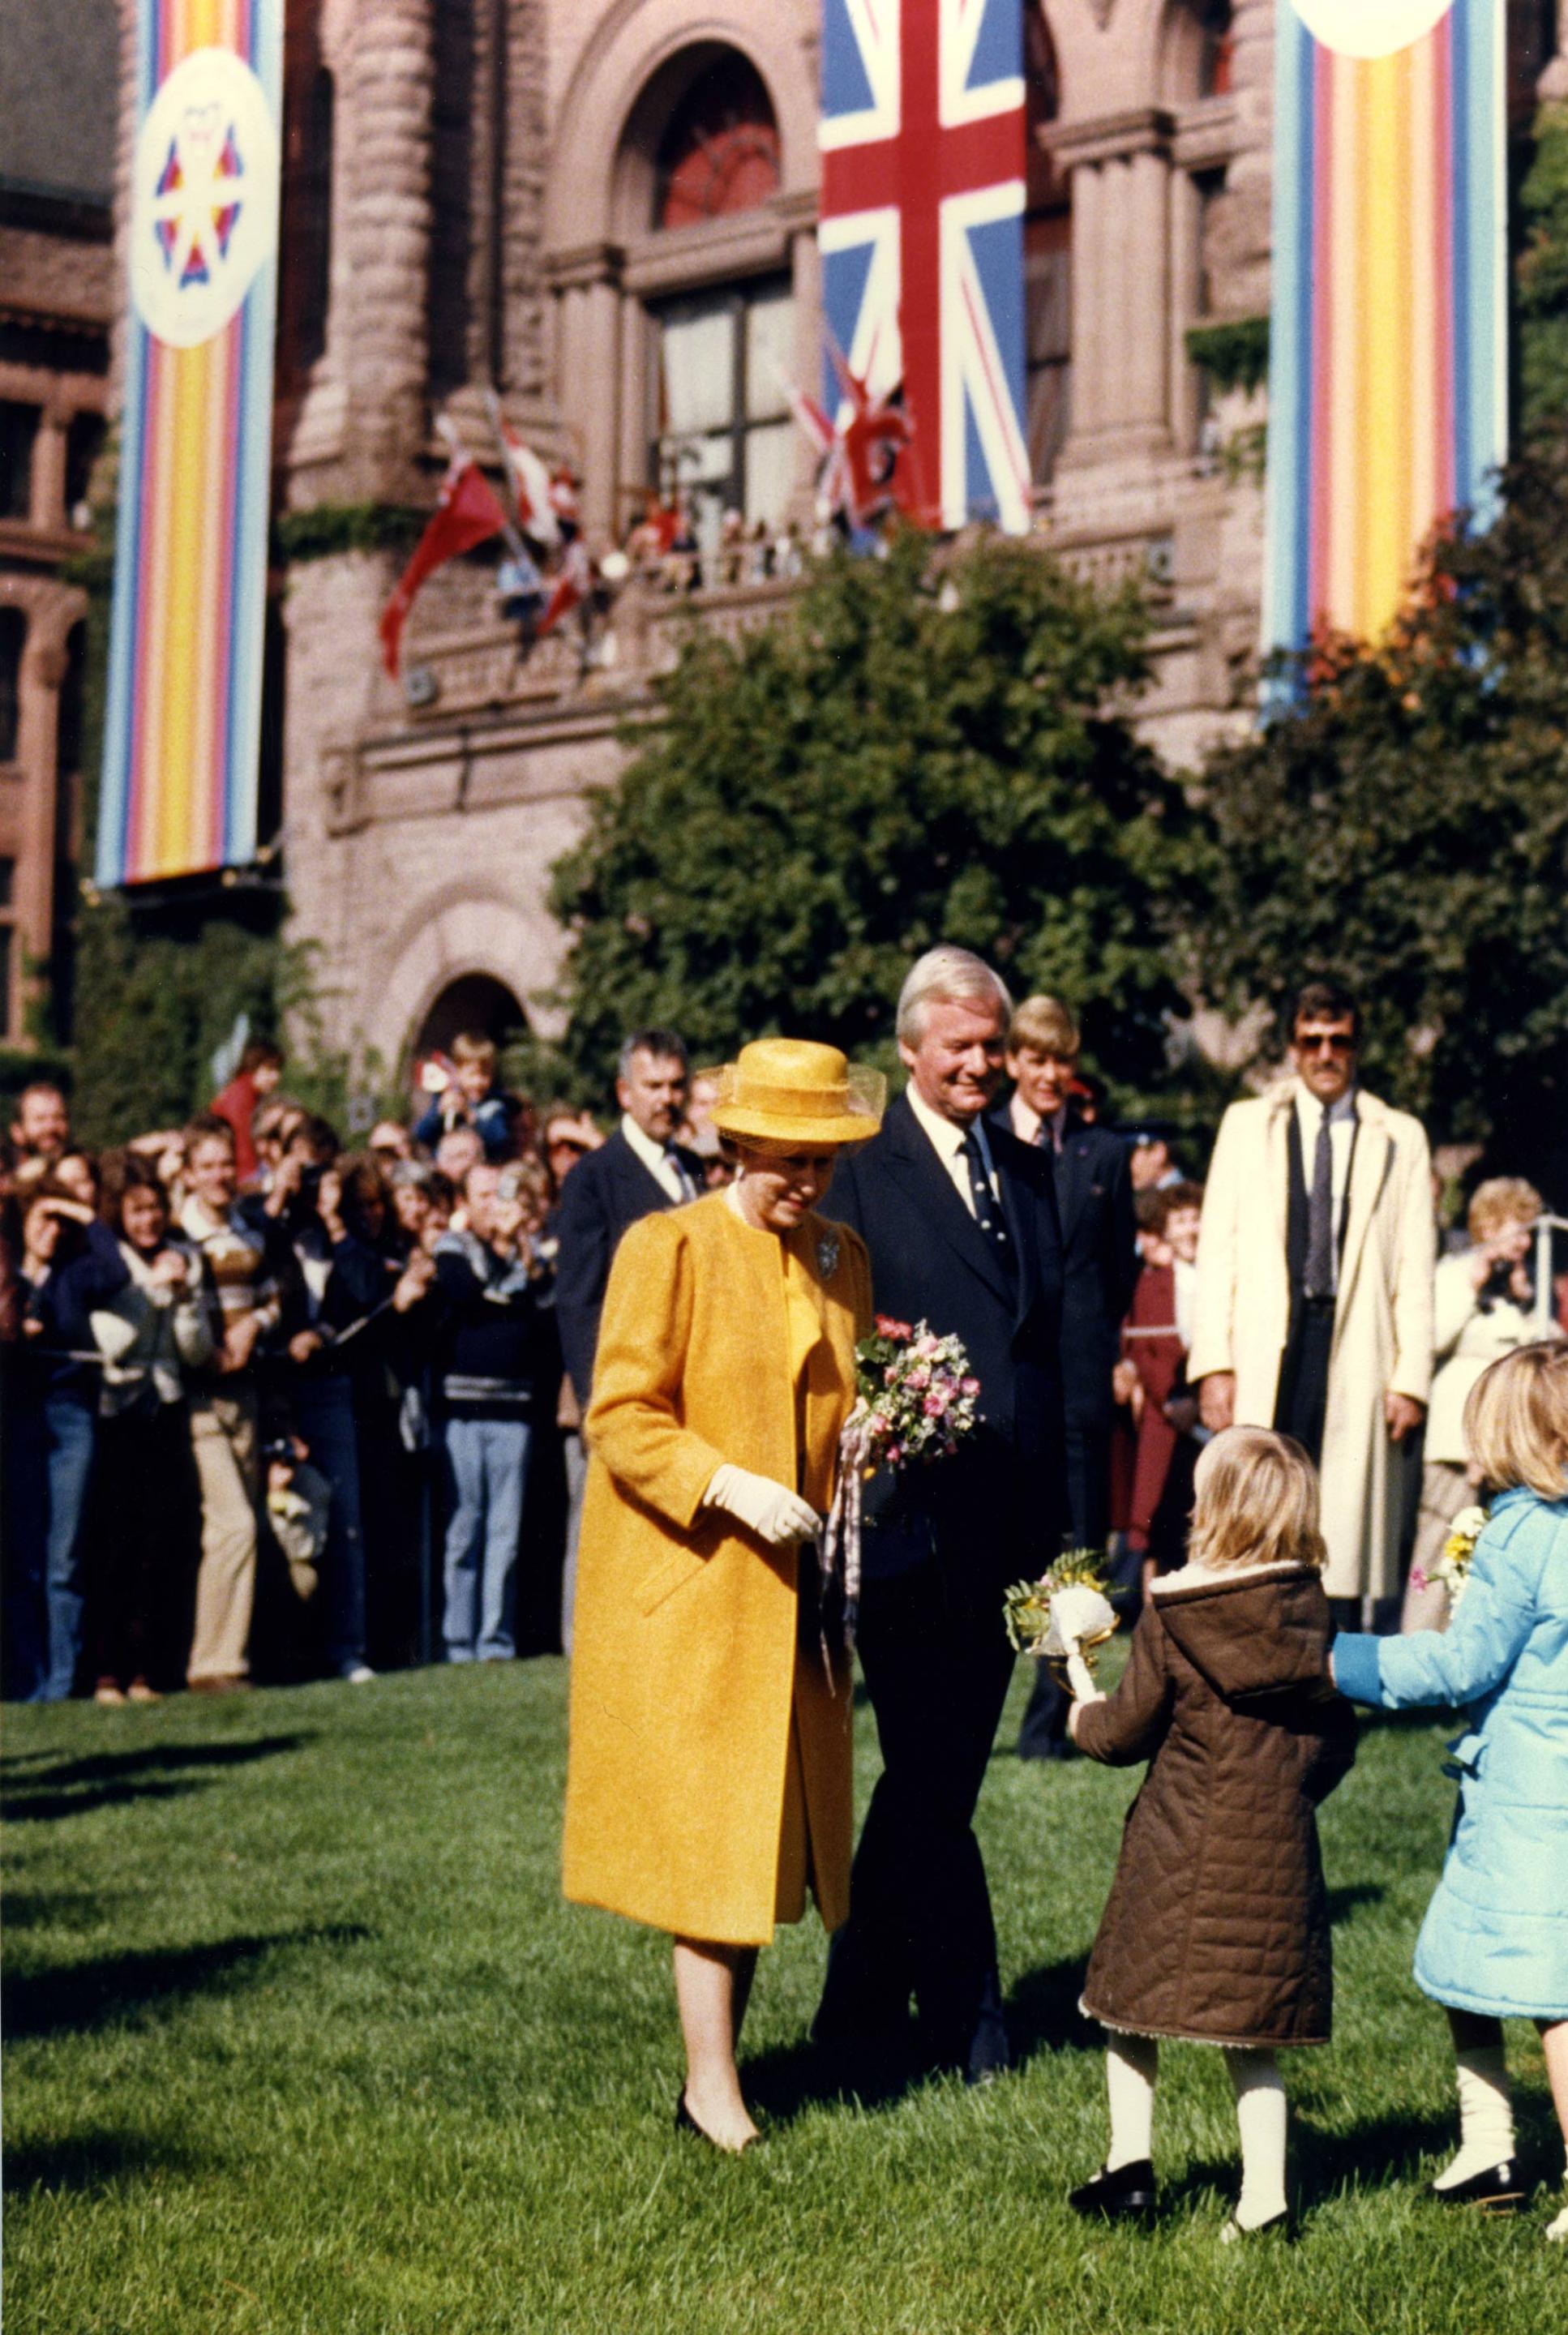 Her Majesty Queen Elizabeth II accepts flowers from several young girls during a 1984 visit to Queen's Park